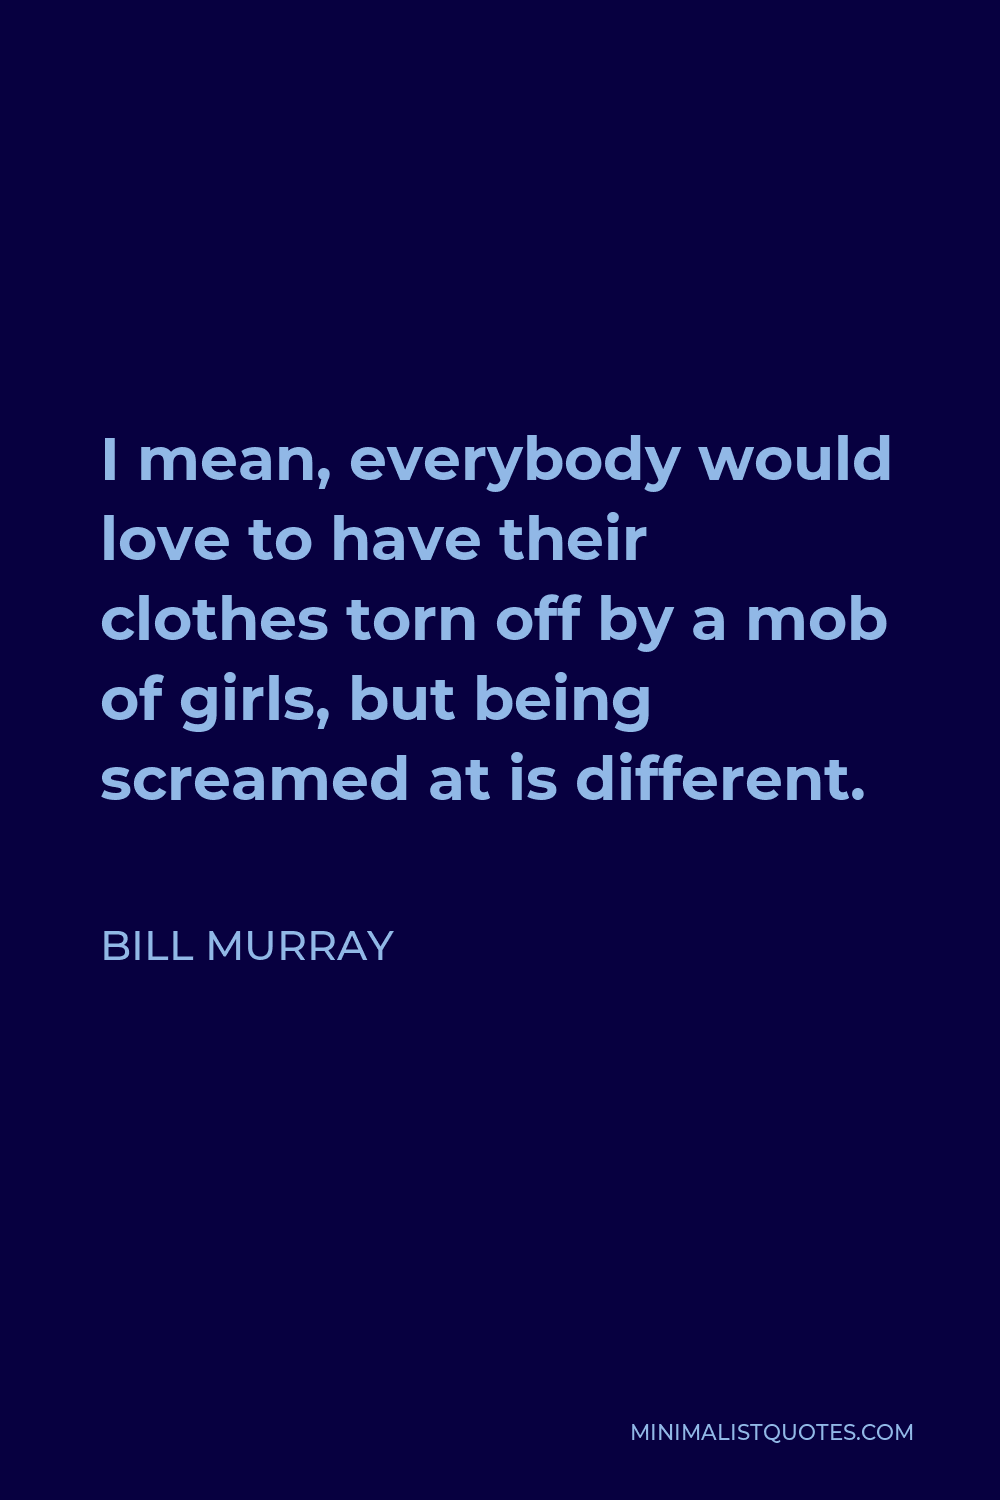 Bill Murray Quote - I mean, everybody would love to have their clothes torn off by a mob of girls, but being screamed at is different.